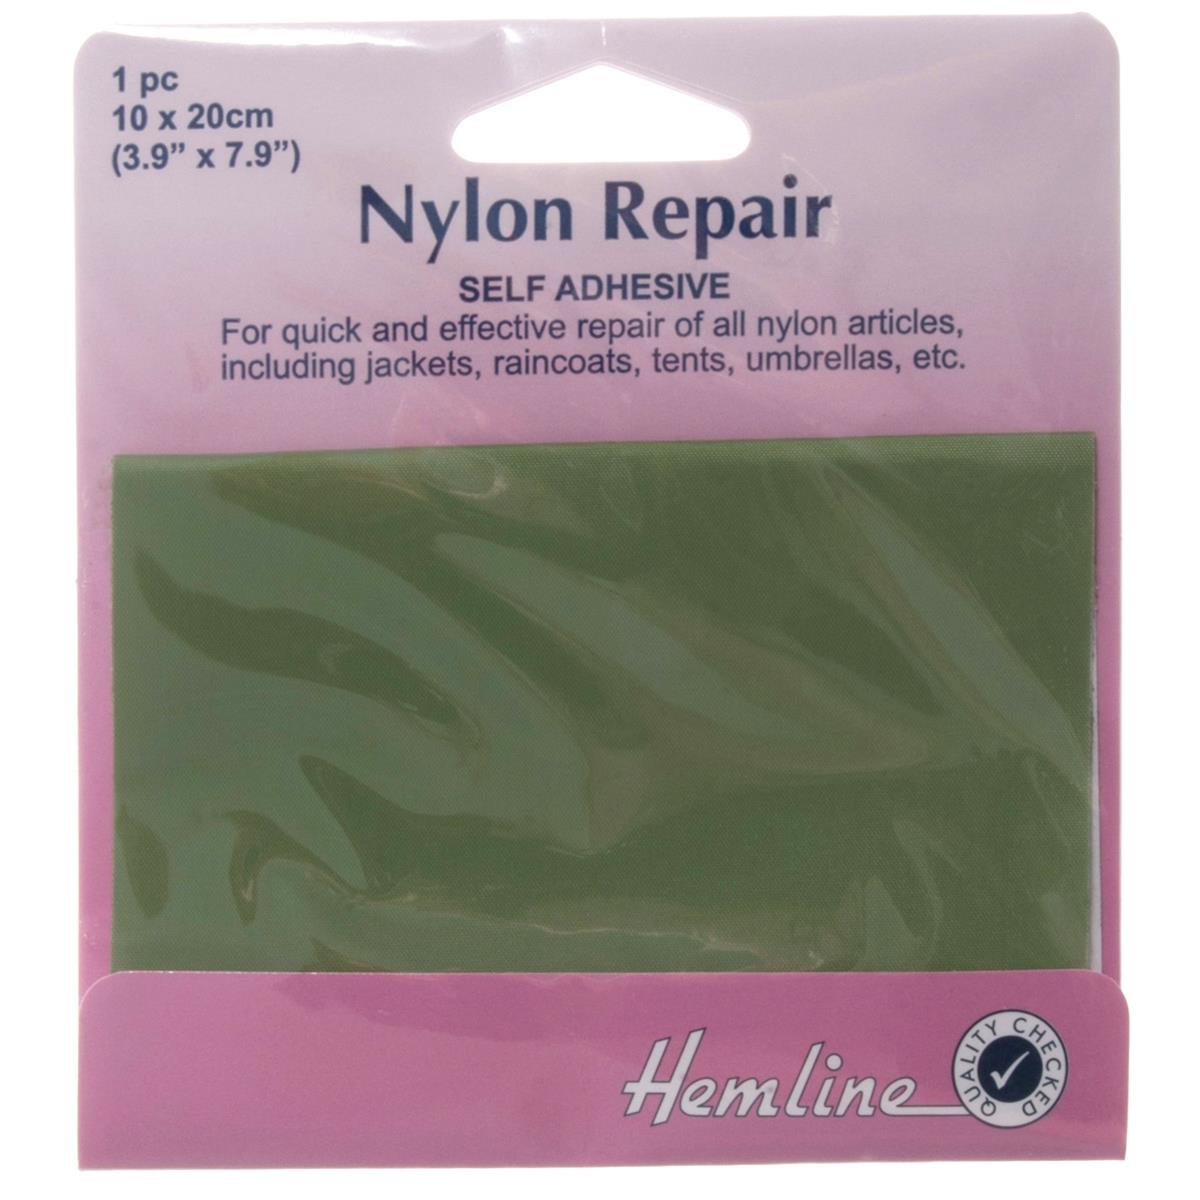 24 Pieces Nylon Repair Patches Self-Adhesive and similar items